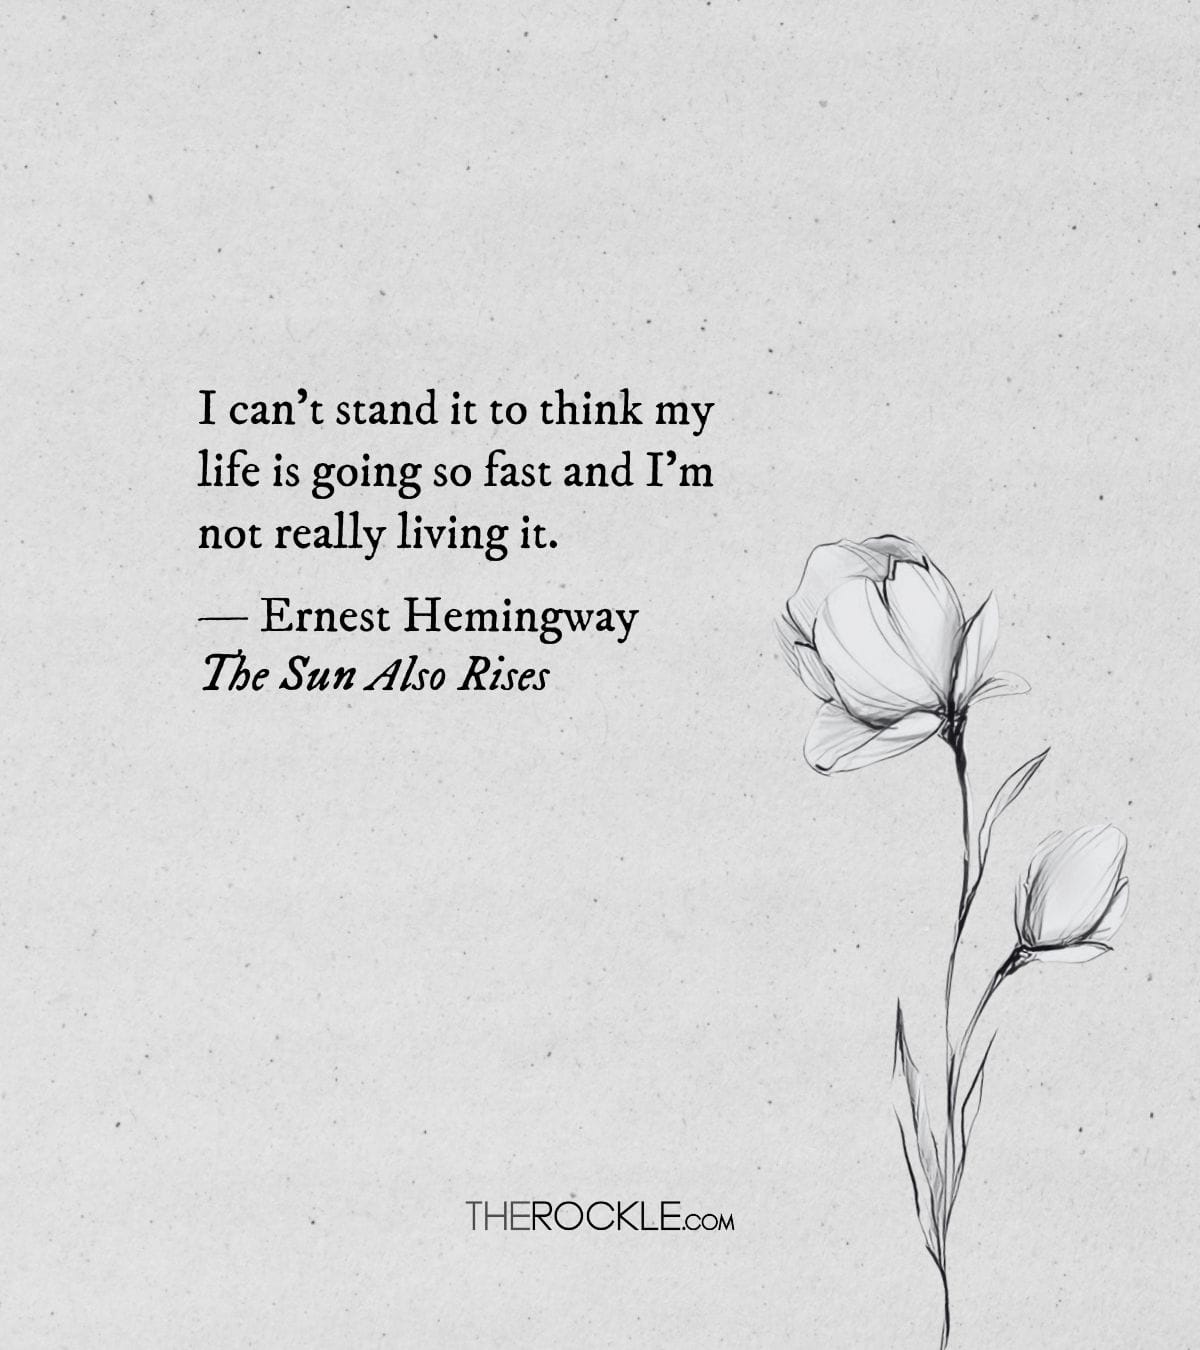 Hemingway on time passing by quickly